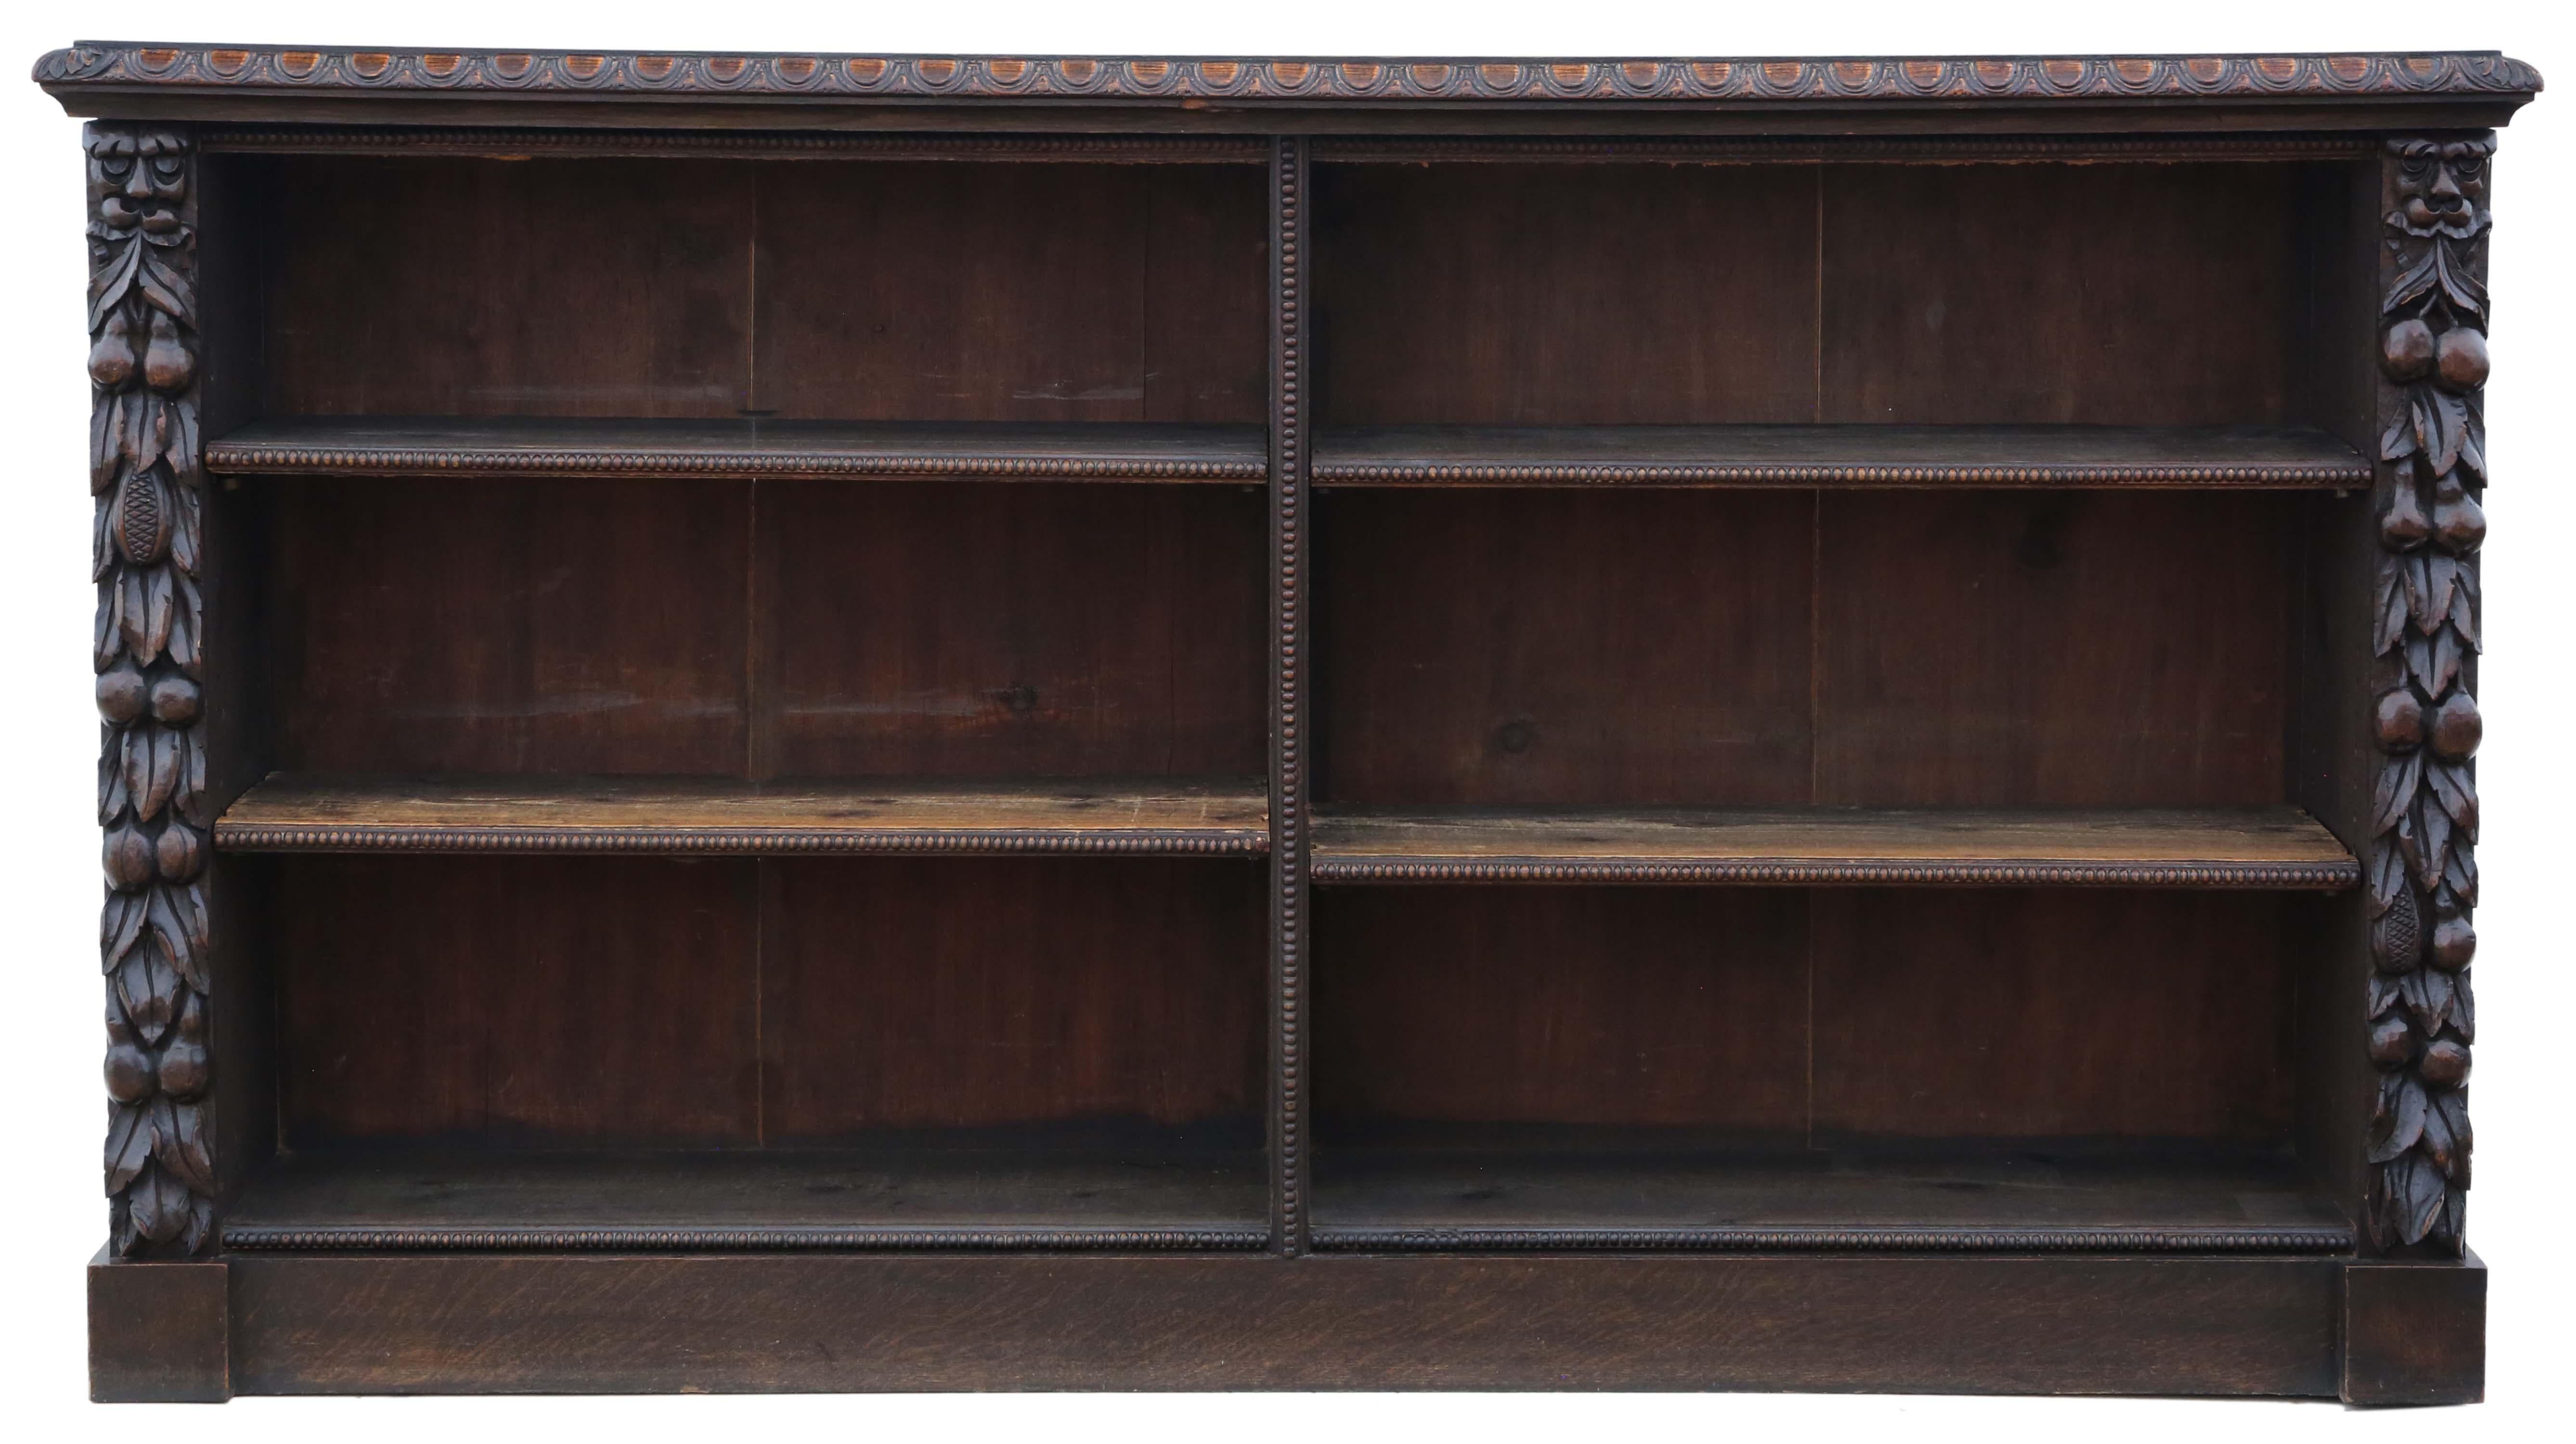 Antique large fine quality 19th Century carved oak bookcase C1895.

This is a lovely quality bookcase, that is full of age, charm and character.

Solid, with no loose joints and no woodworm.

The shelves are held in place by replacement support